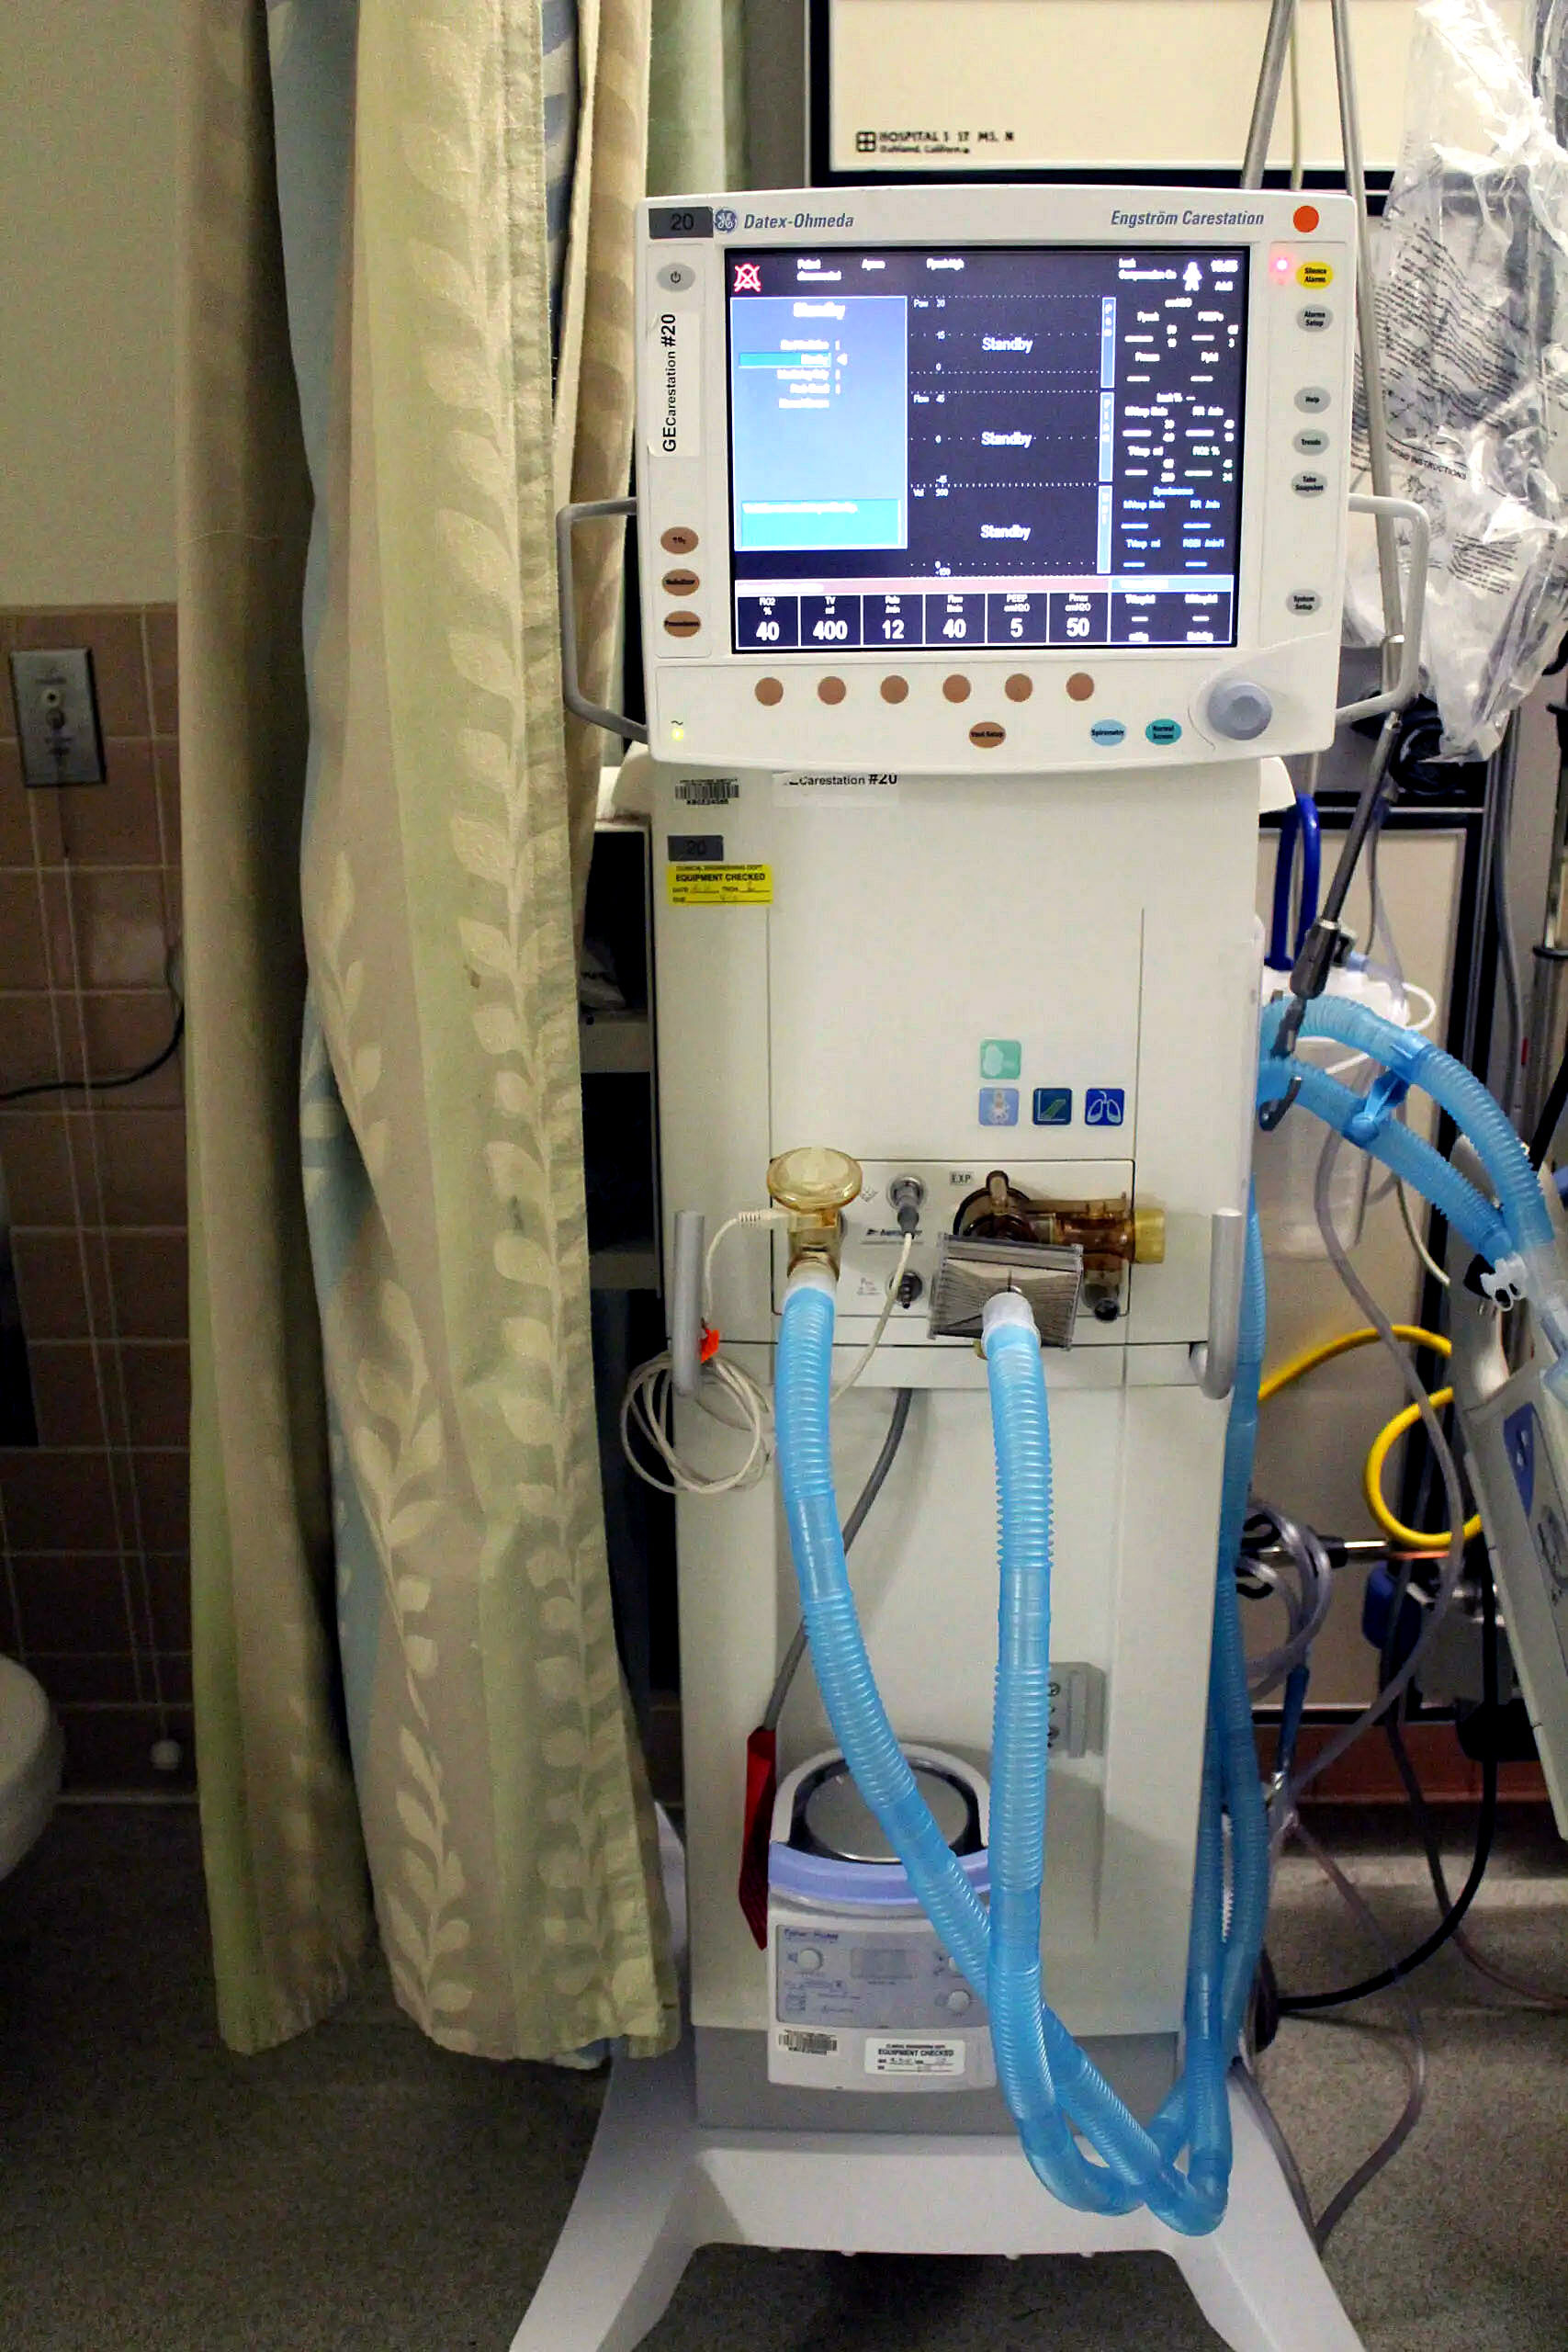 An image of ICU equipment in a hospital ward